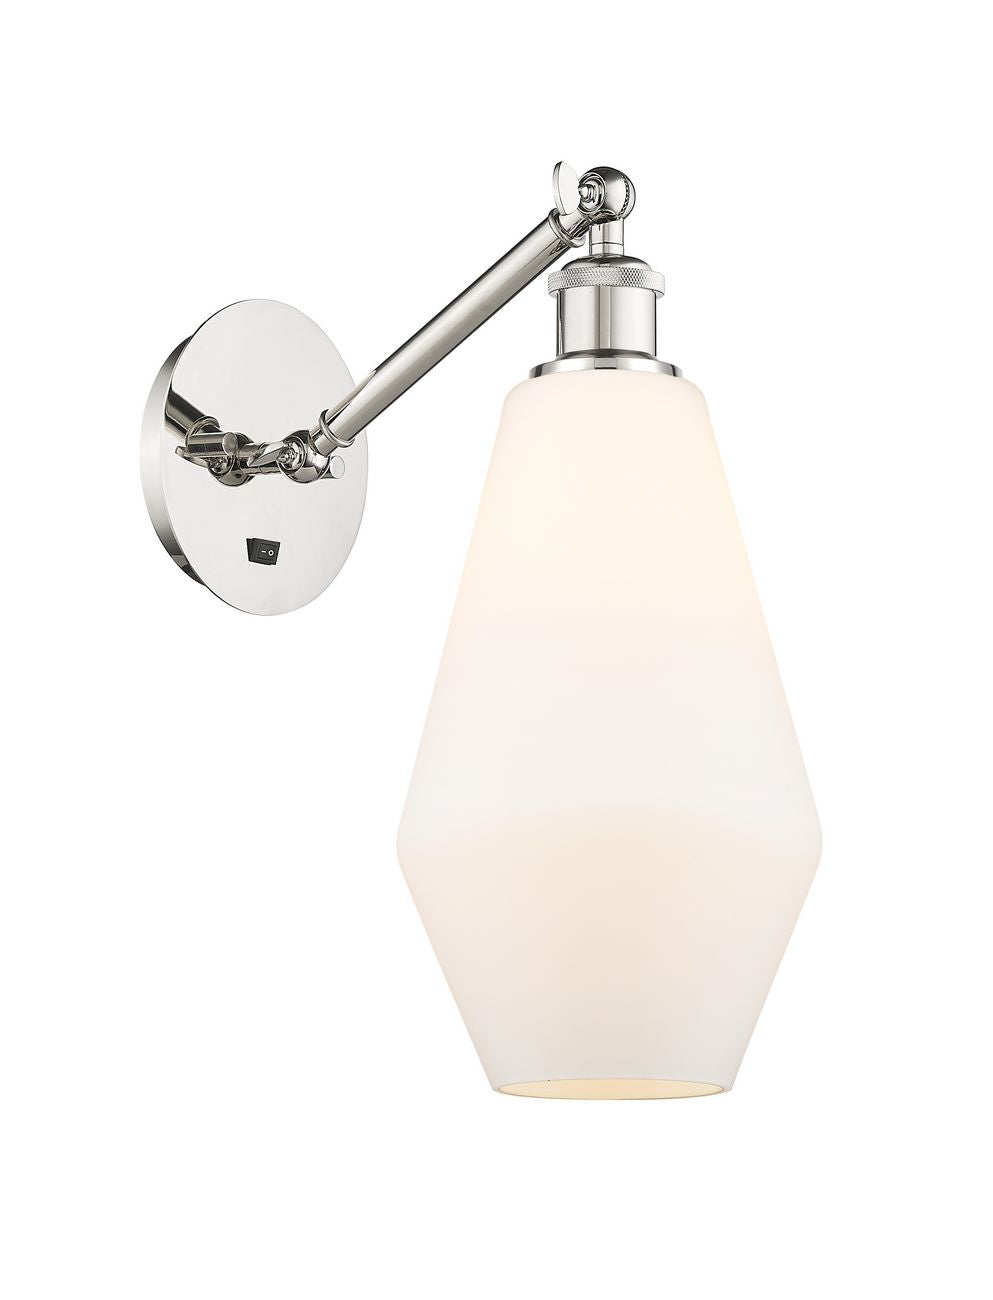 317-1W-PN-G651-7 1-Light 7" Polished Nickel Sconce - Cased Matte White Cindyrella 7" Glass - LED Bulb - Dimmensions: 7 x 13.25 x 16 - Glass Up or Down: Yes